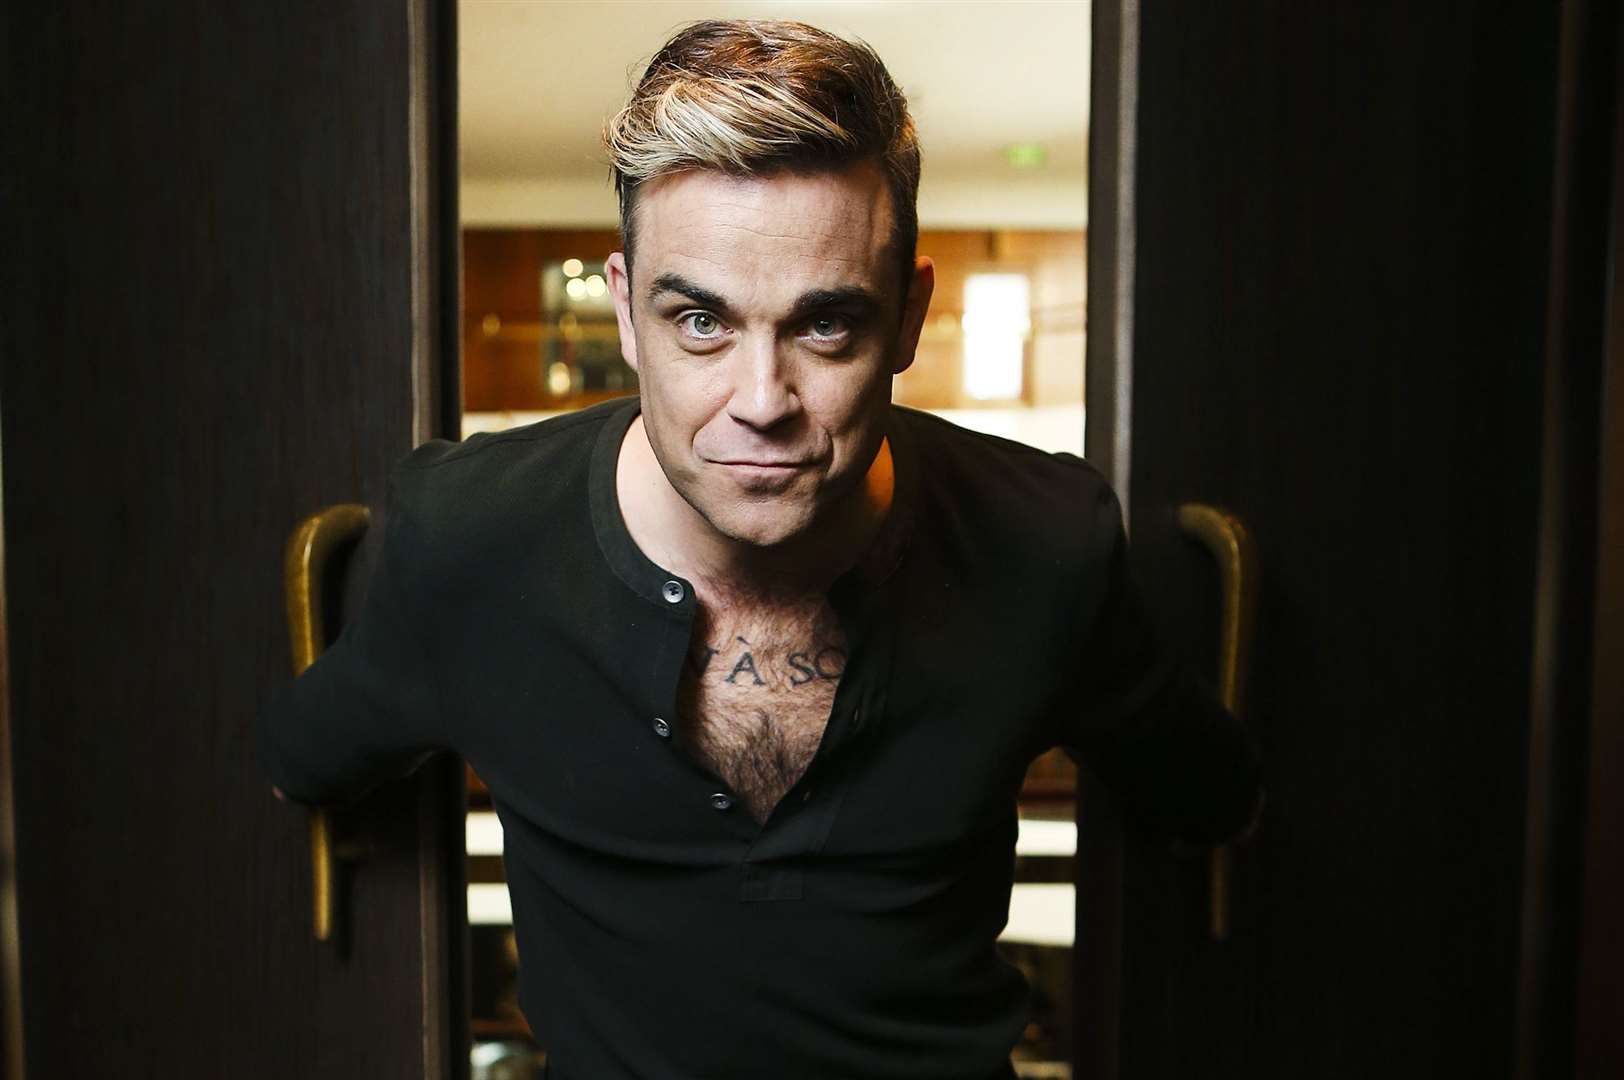 Robbie Williams spent 23 minutes chatting to the Deal mum via Instagram